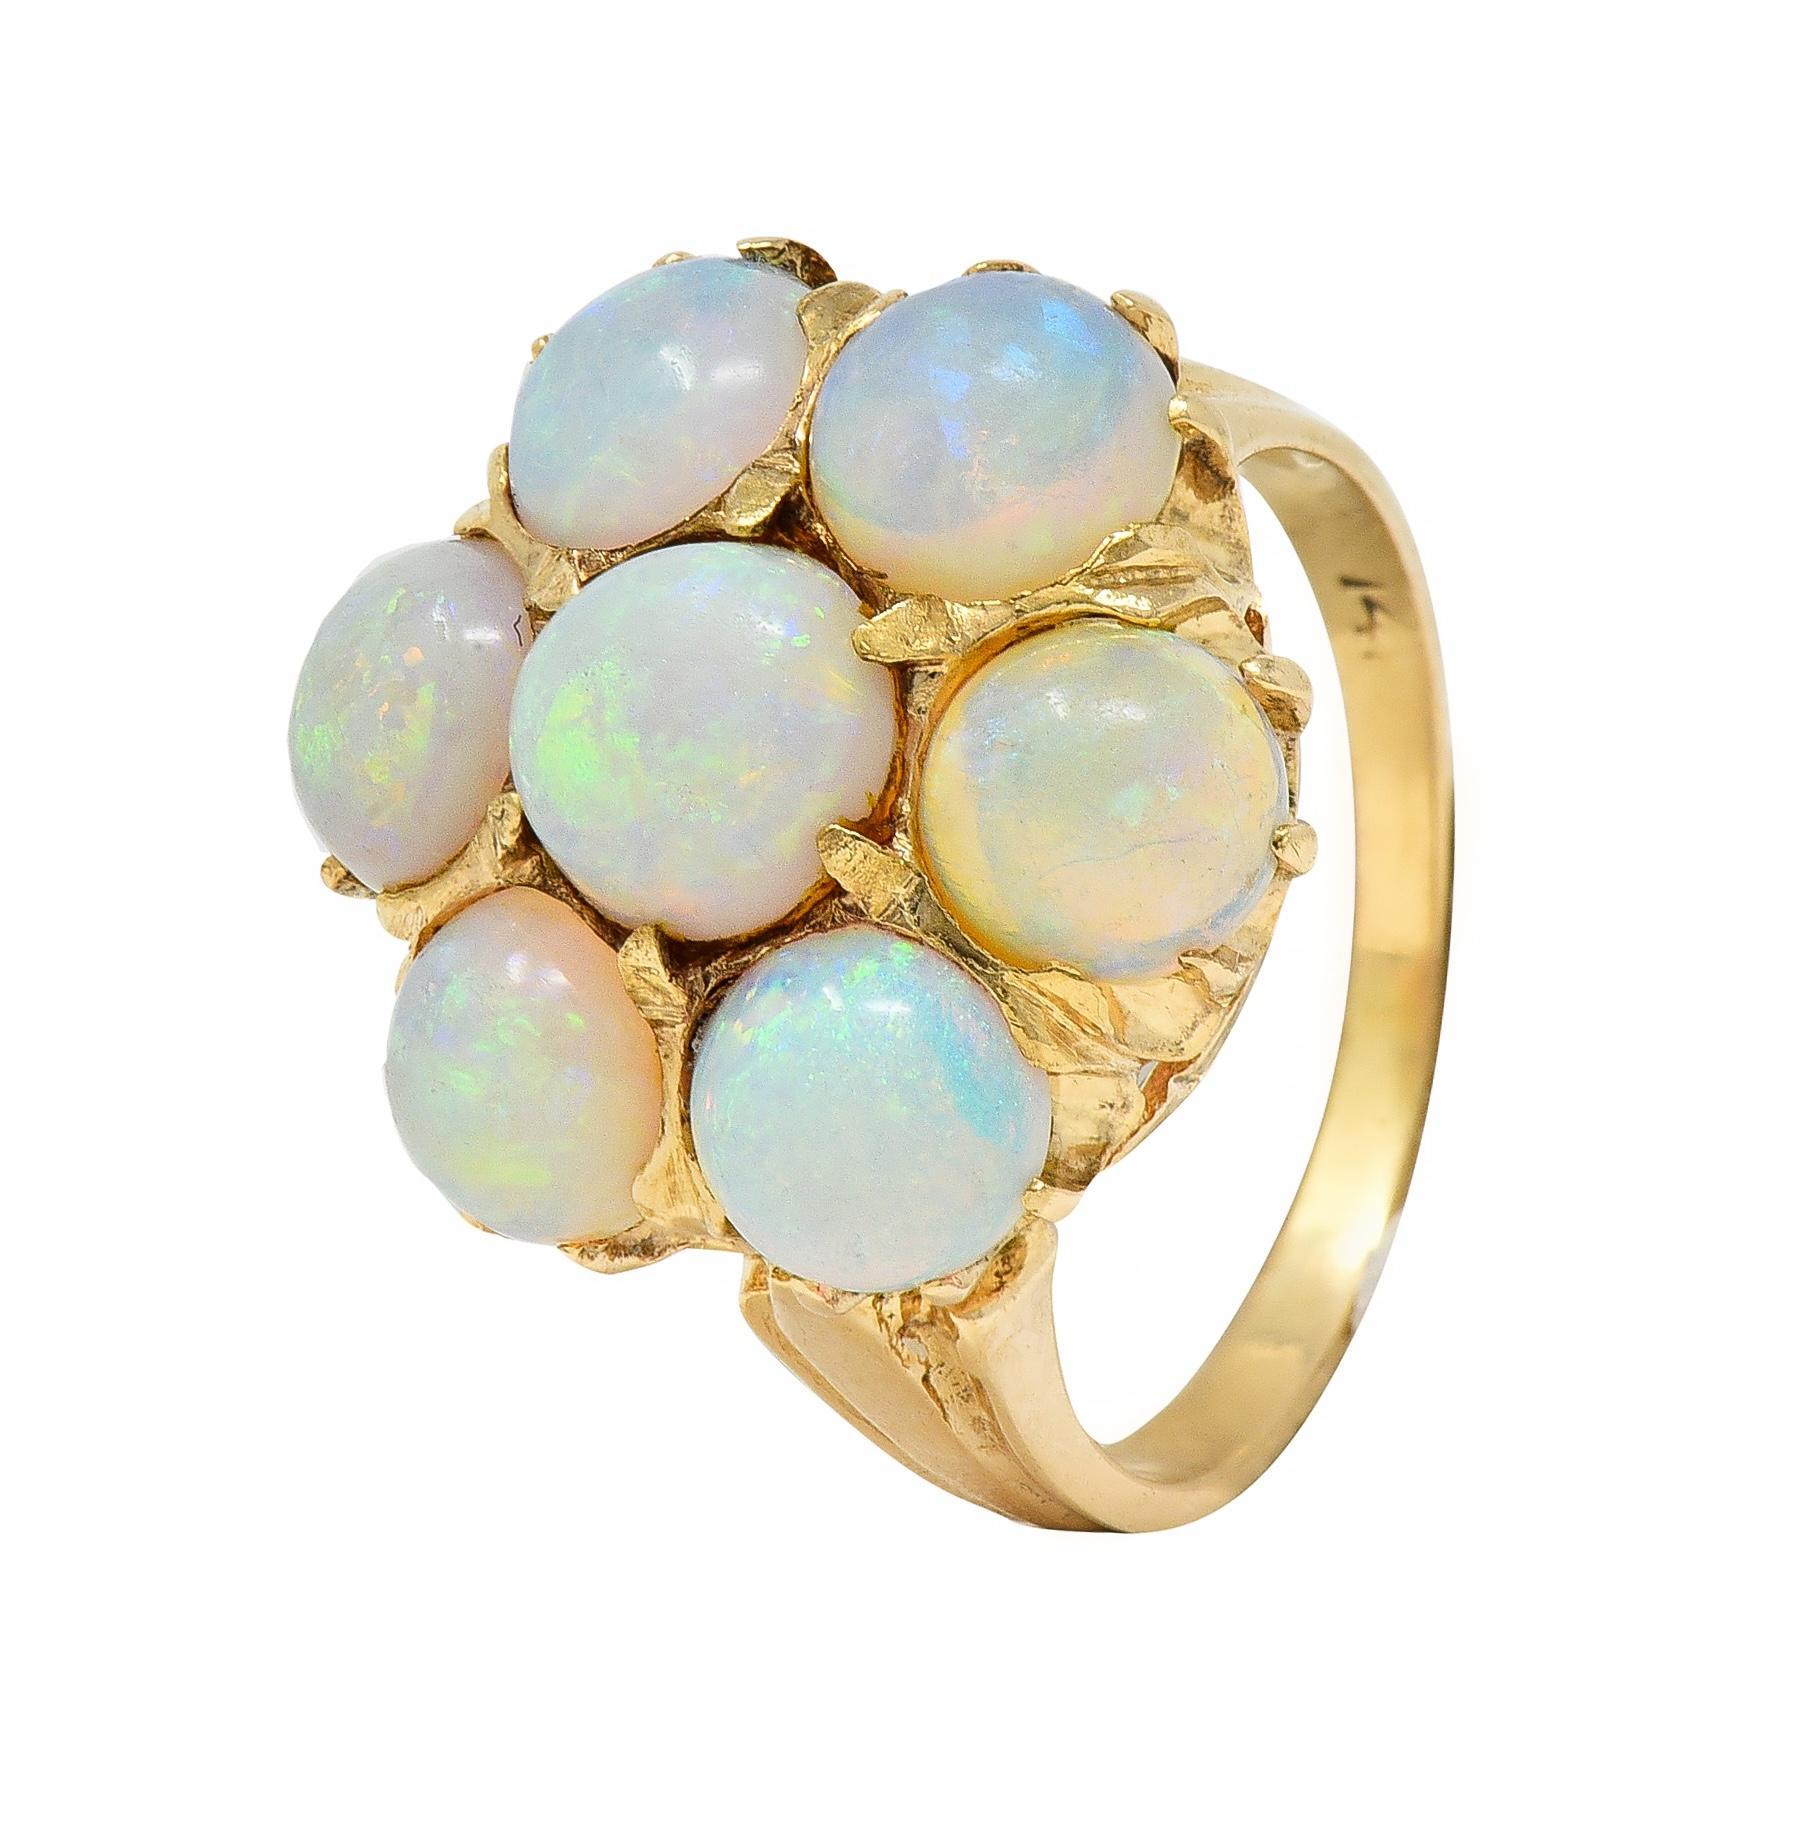 Centering a 6.0 mm round opal cabochon with a floral motif cluster surround
Comprised of additional 5.0 mm round opal cabochons - well-matched
Translucent white in body color with spectral play-of-color
All prong set in a pierced gallery
Flanked by